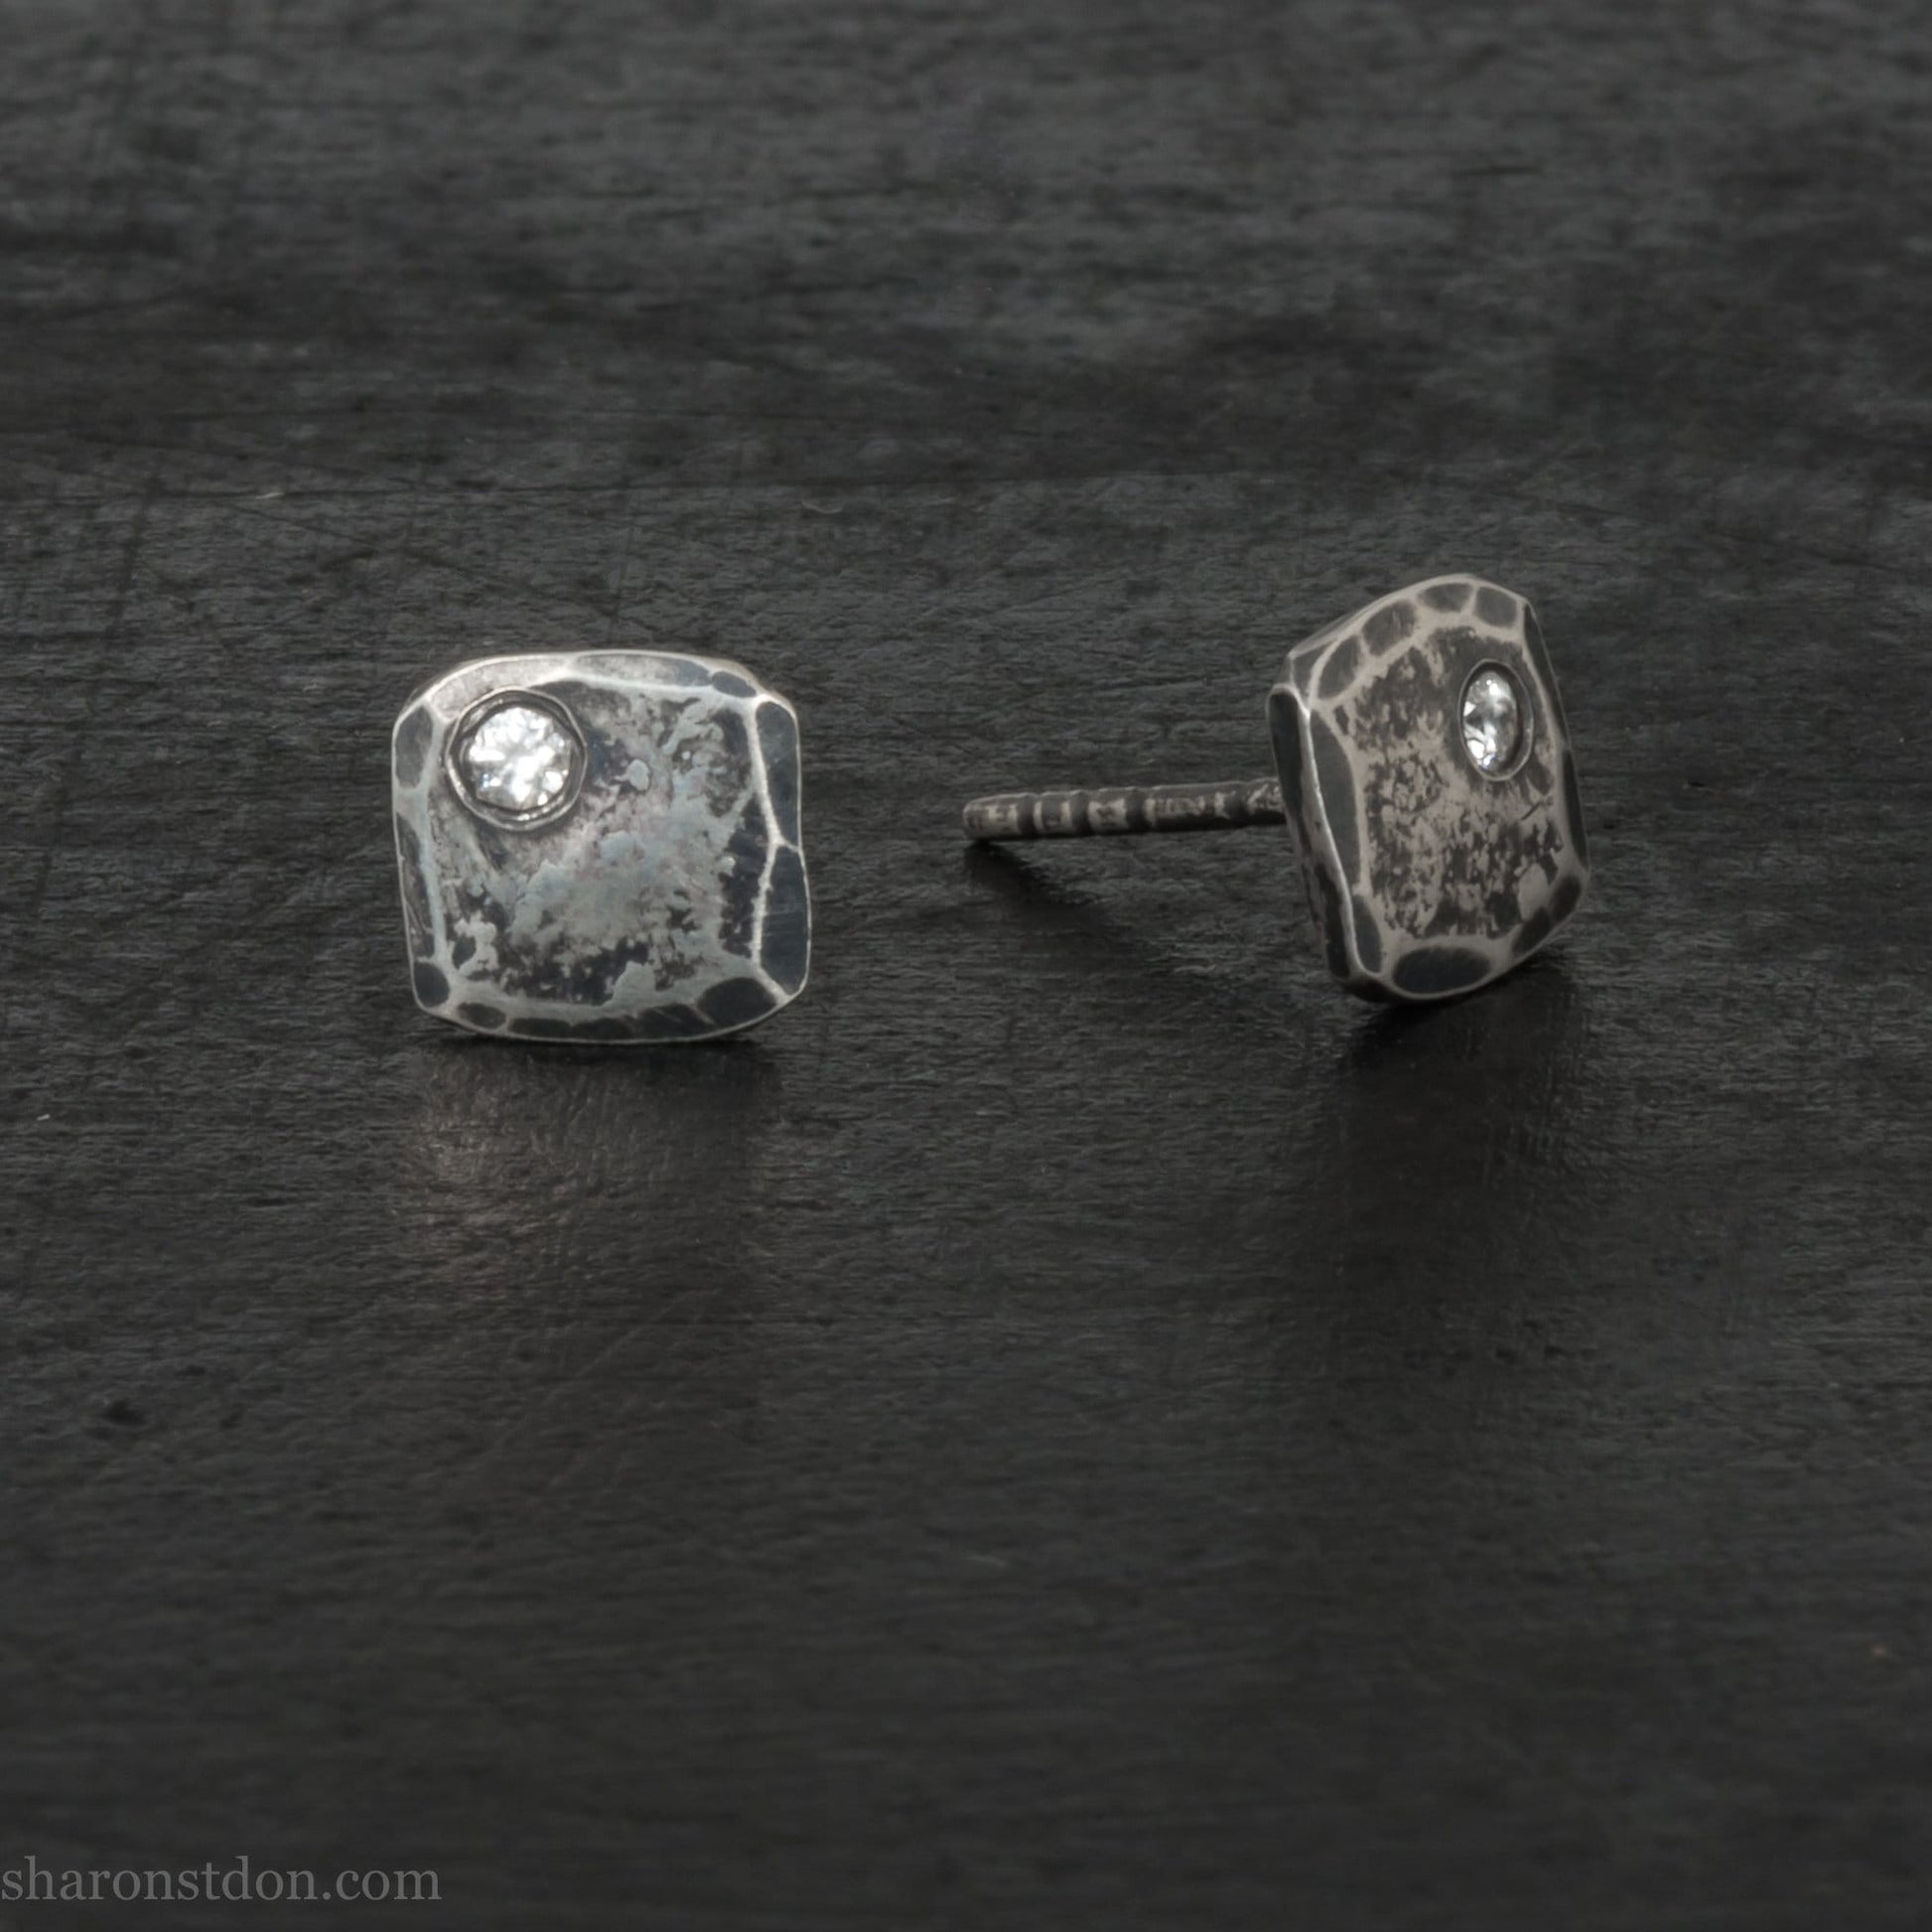 Handmade 925 sterling silver stud earrings with cubic zirconia gemstones. Daily wear small square stud earrings made by Sharon SaintDon in North America.